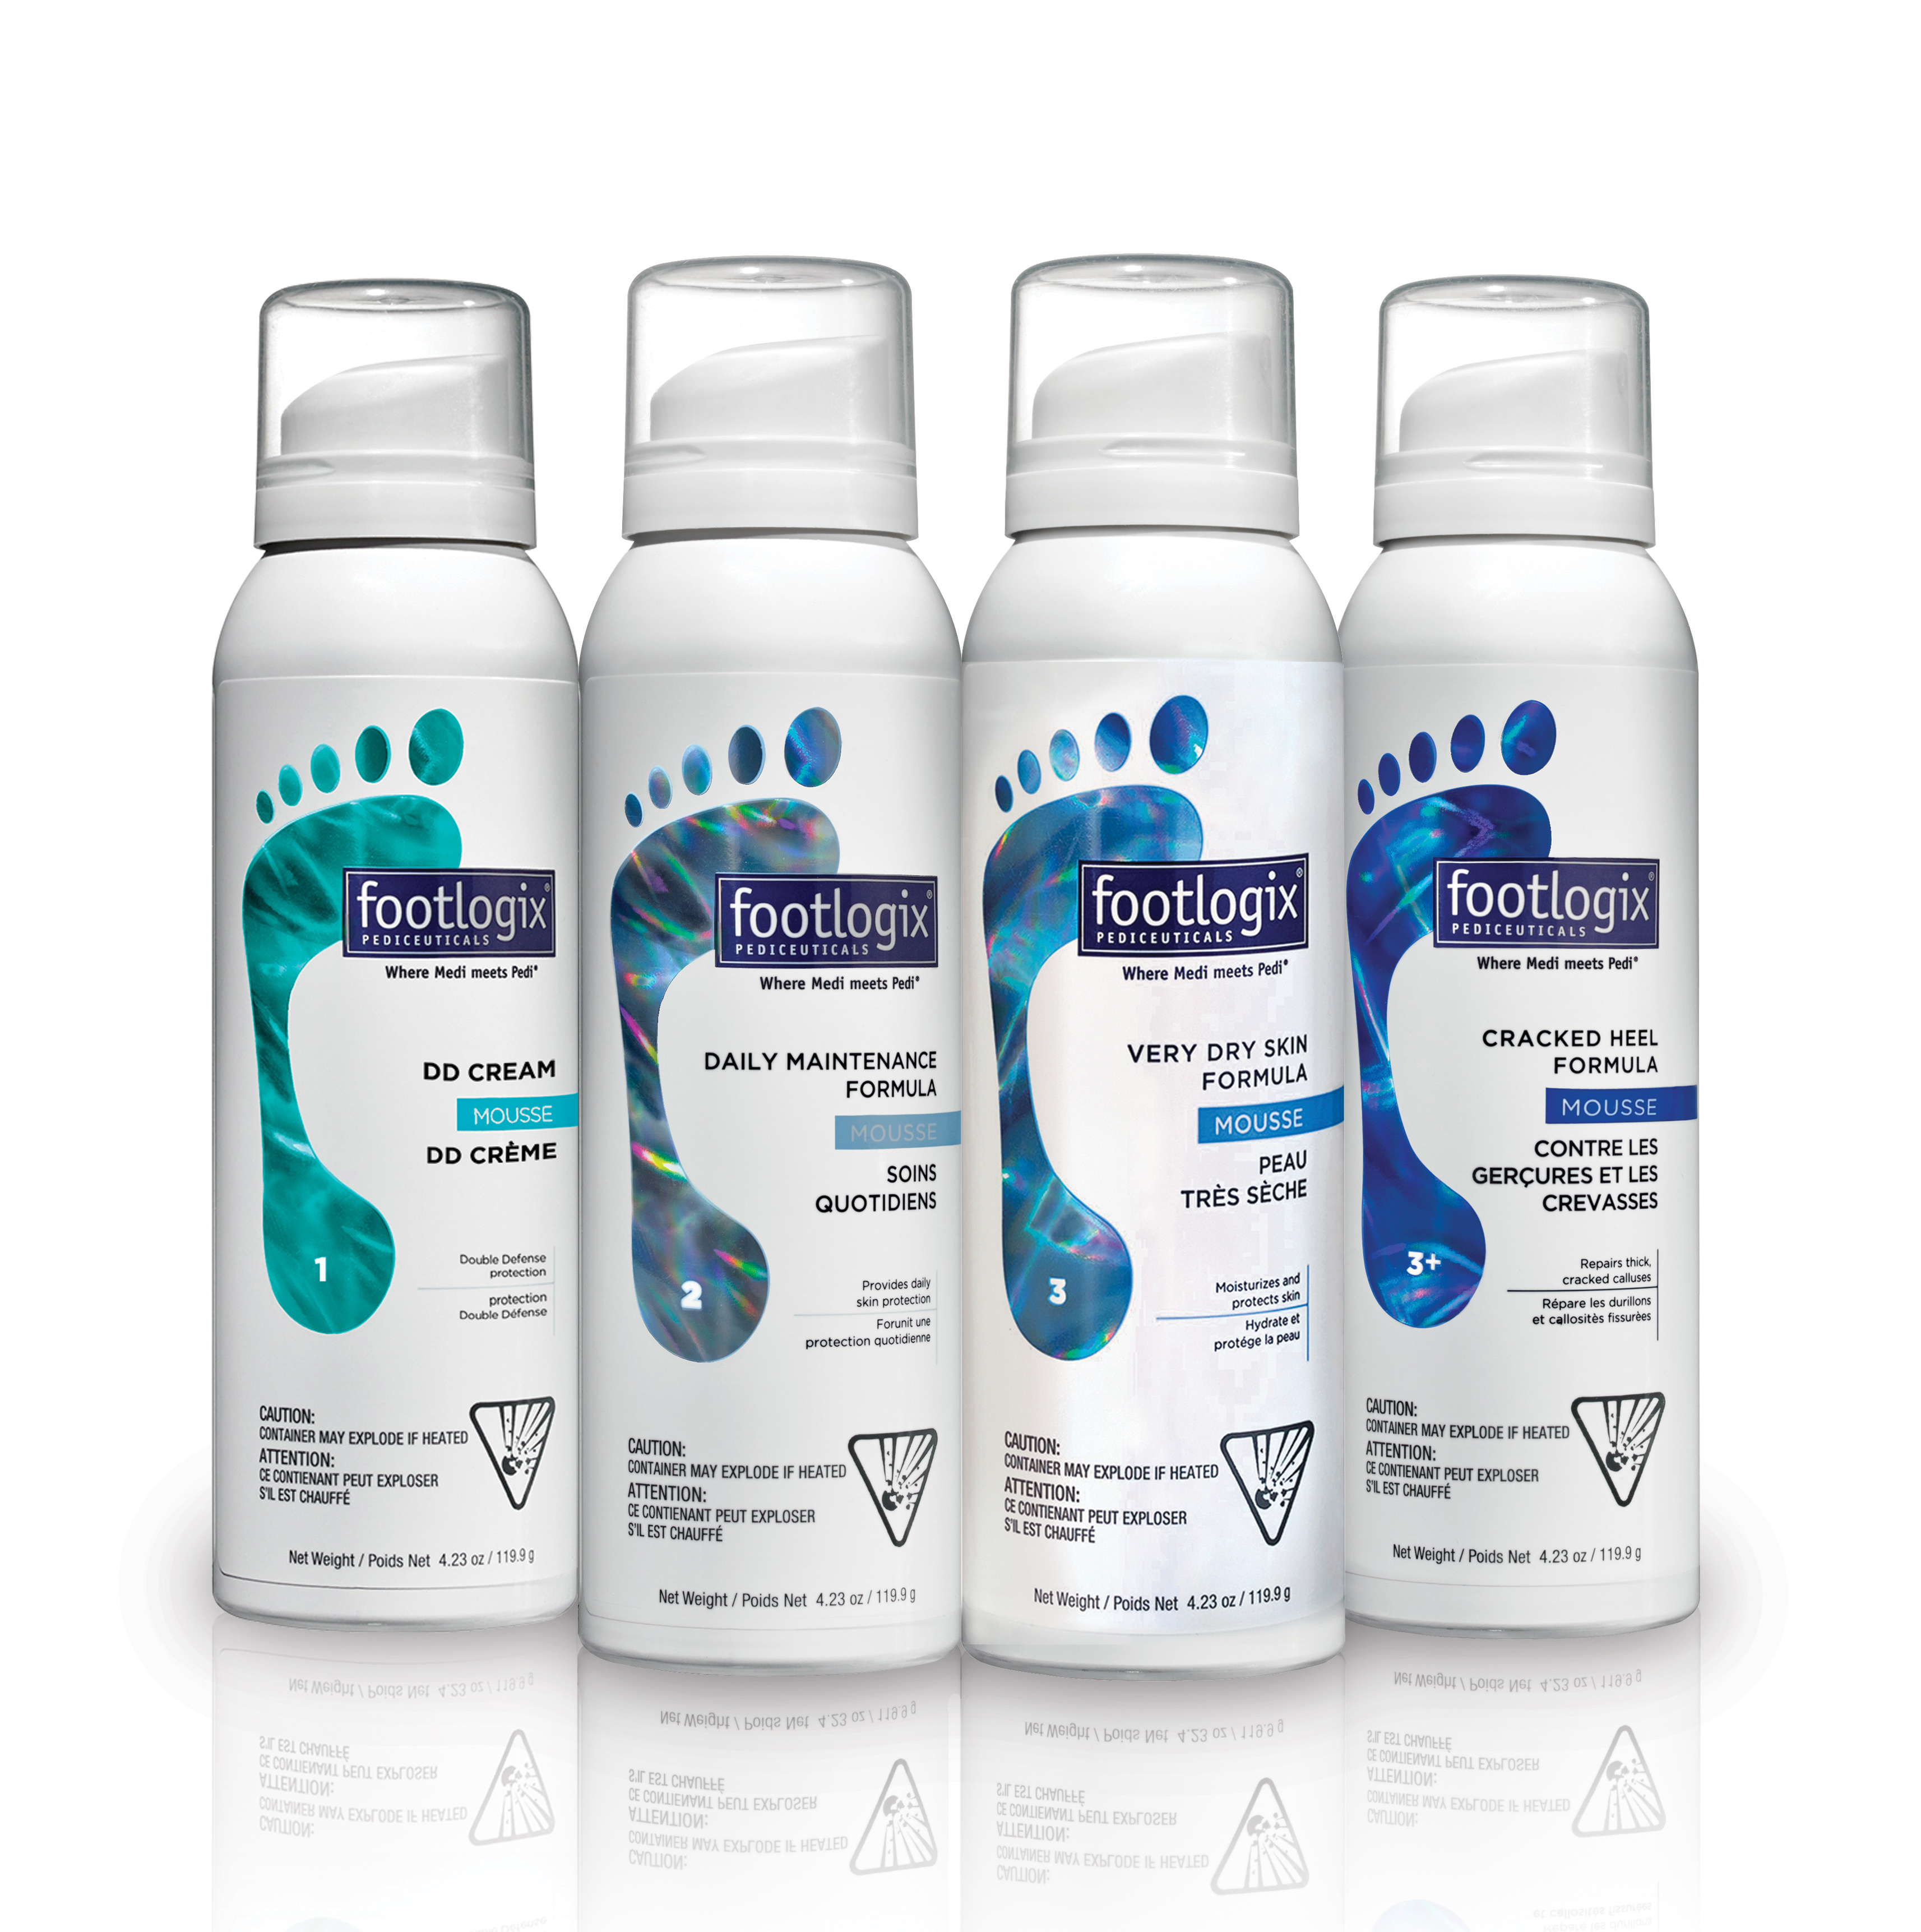 Get Ready For The Colder Months With Footlogix Dry Skin Care!